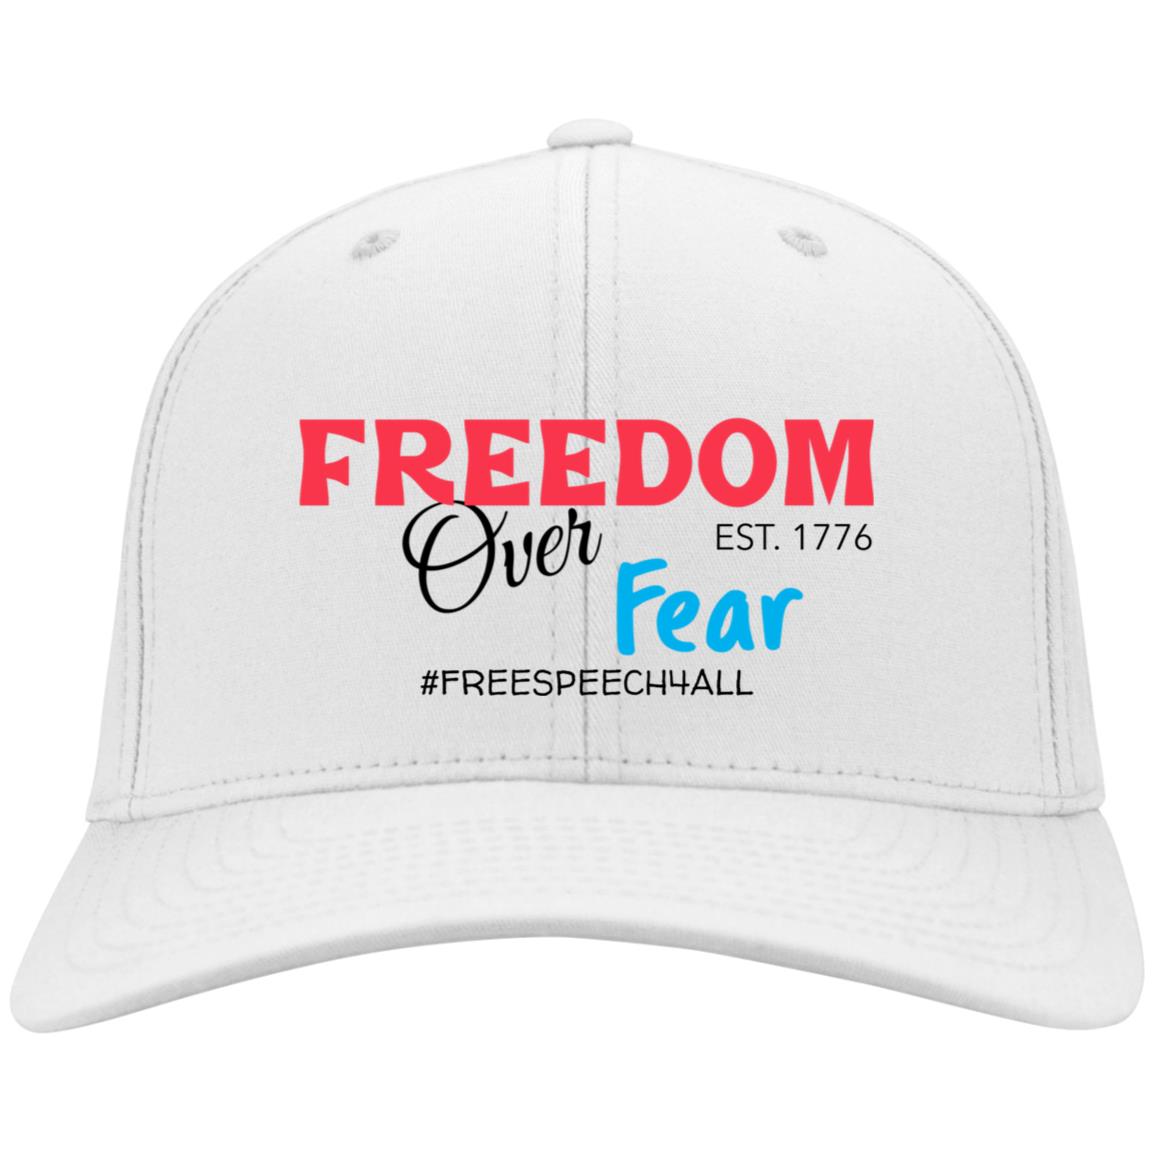 Freedom Over Fear Embroidered Flex Fit Twill Baseball Cap